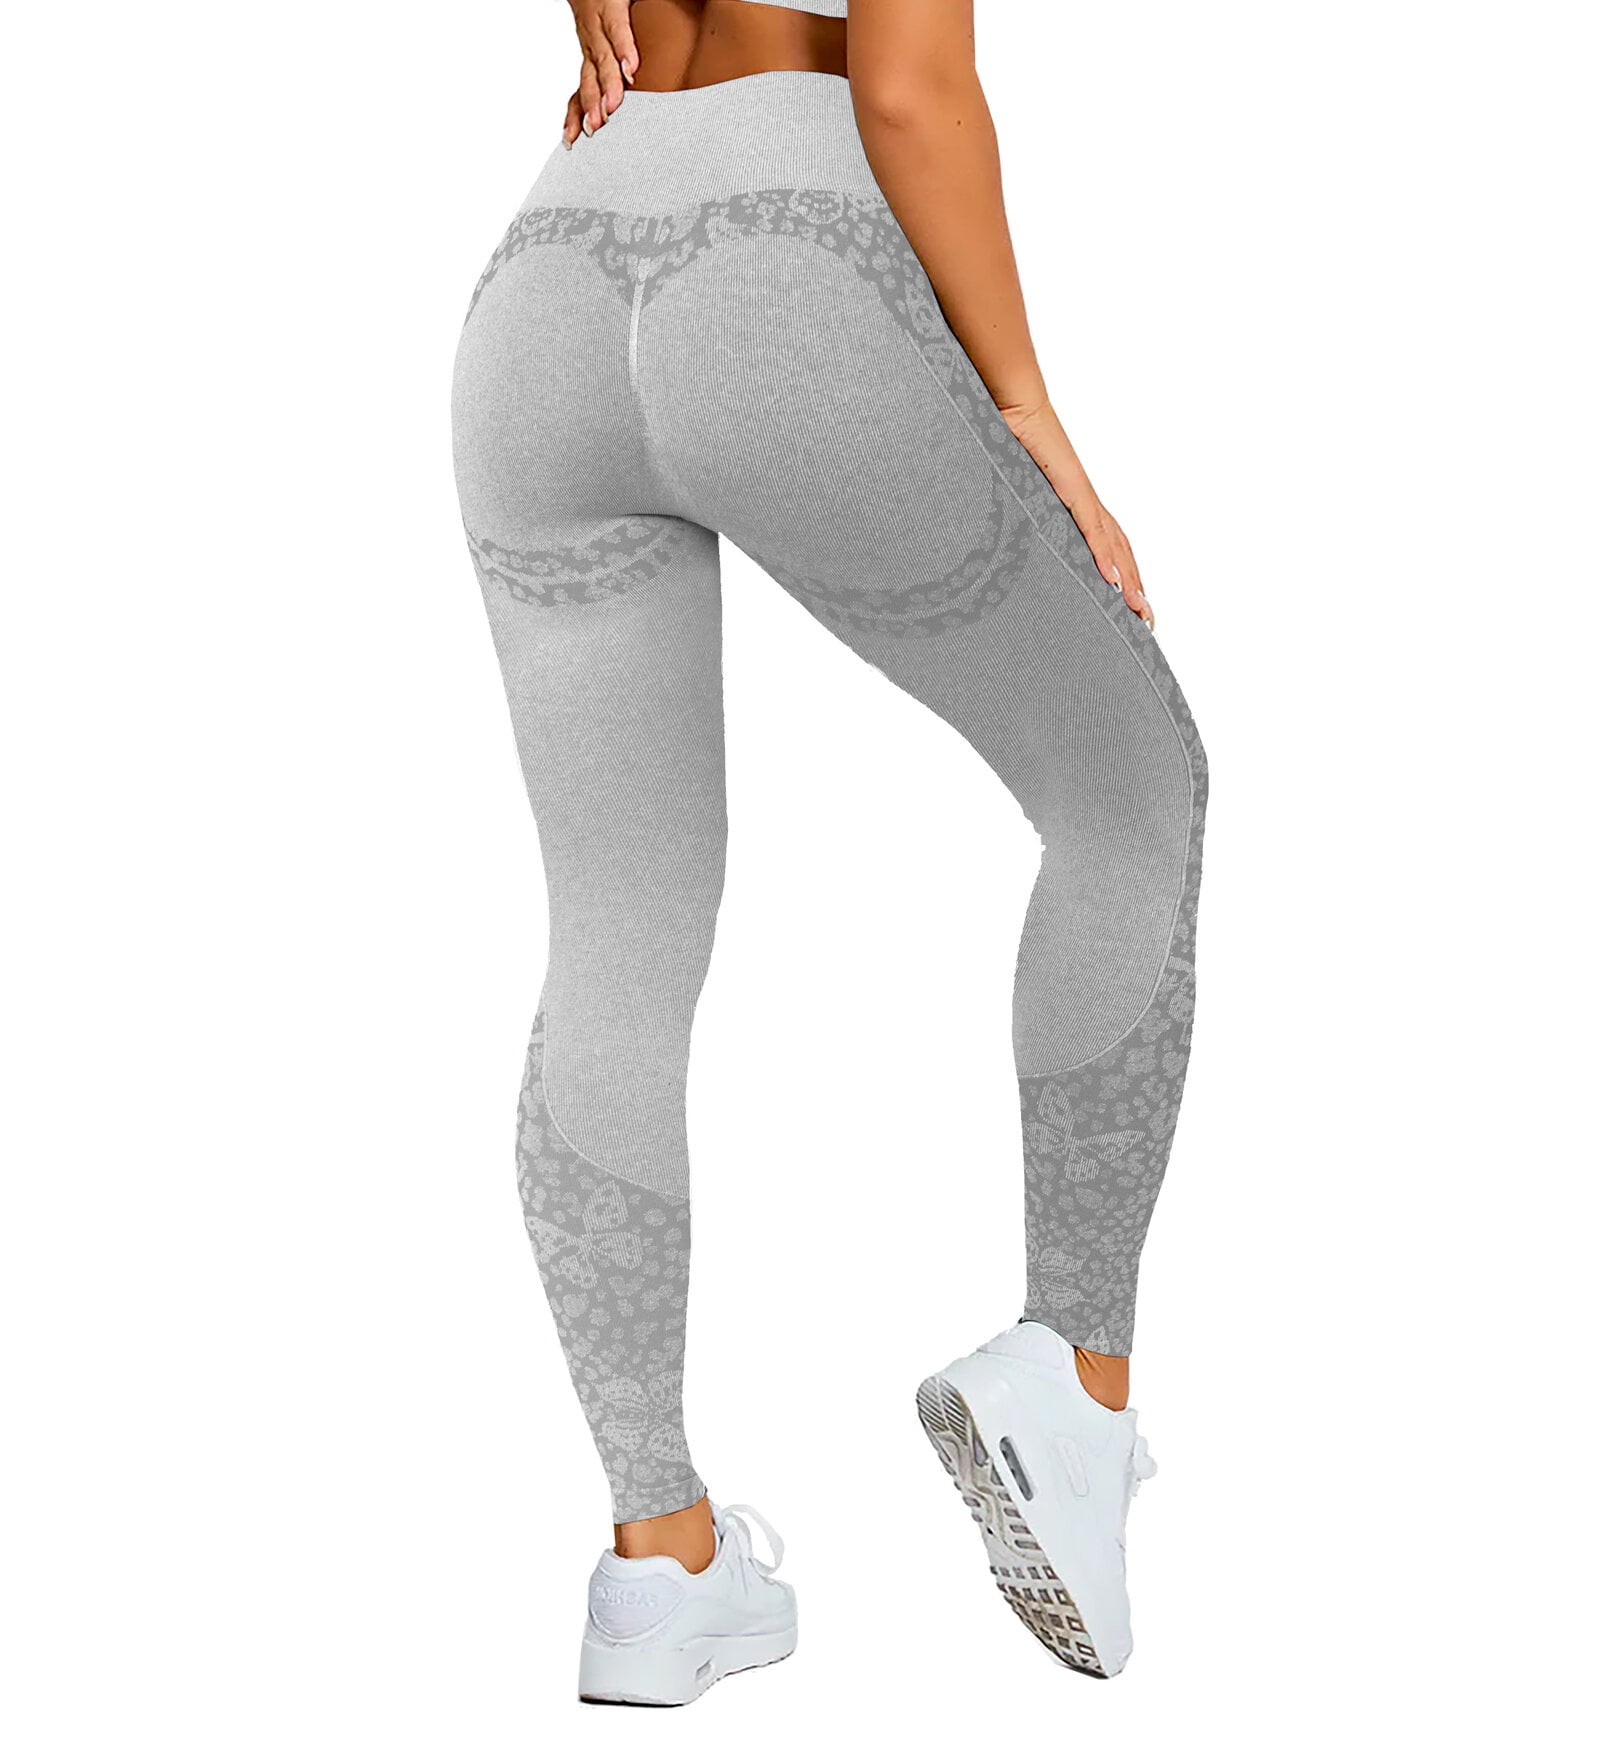 Womens Butt Lifting Seamless Butterfly Leggings for Gym Workout Yoga  Running by MAXXIM Grey X-Large 